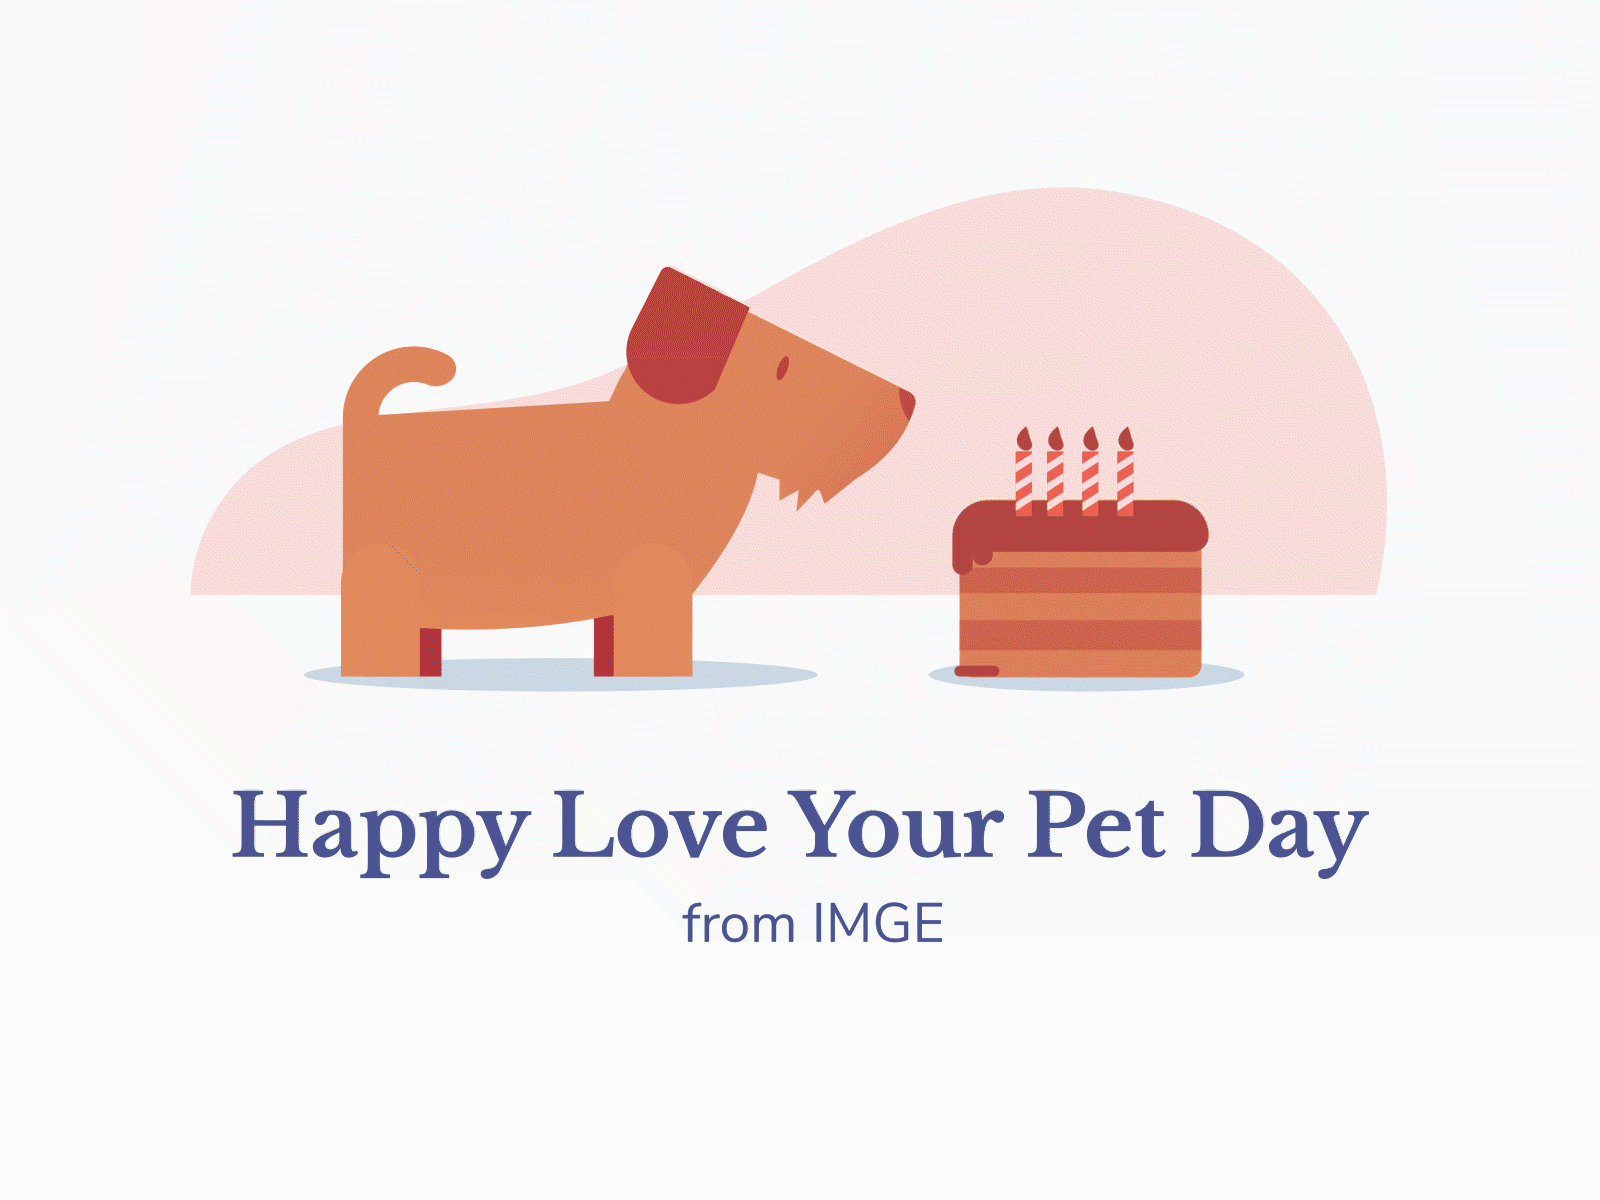 Happy Love Your Pet Day! animals animation cake cute dachshund dog furry gif holiday illustration pet